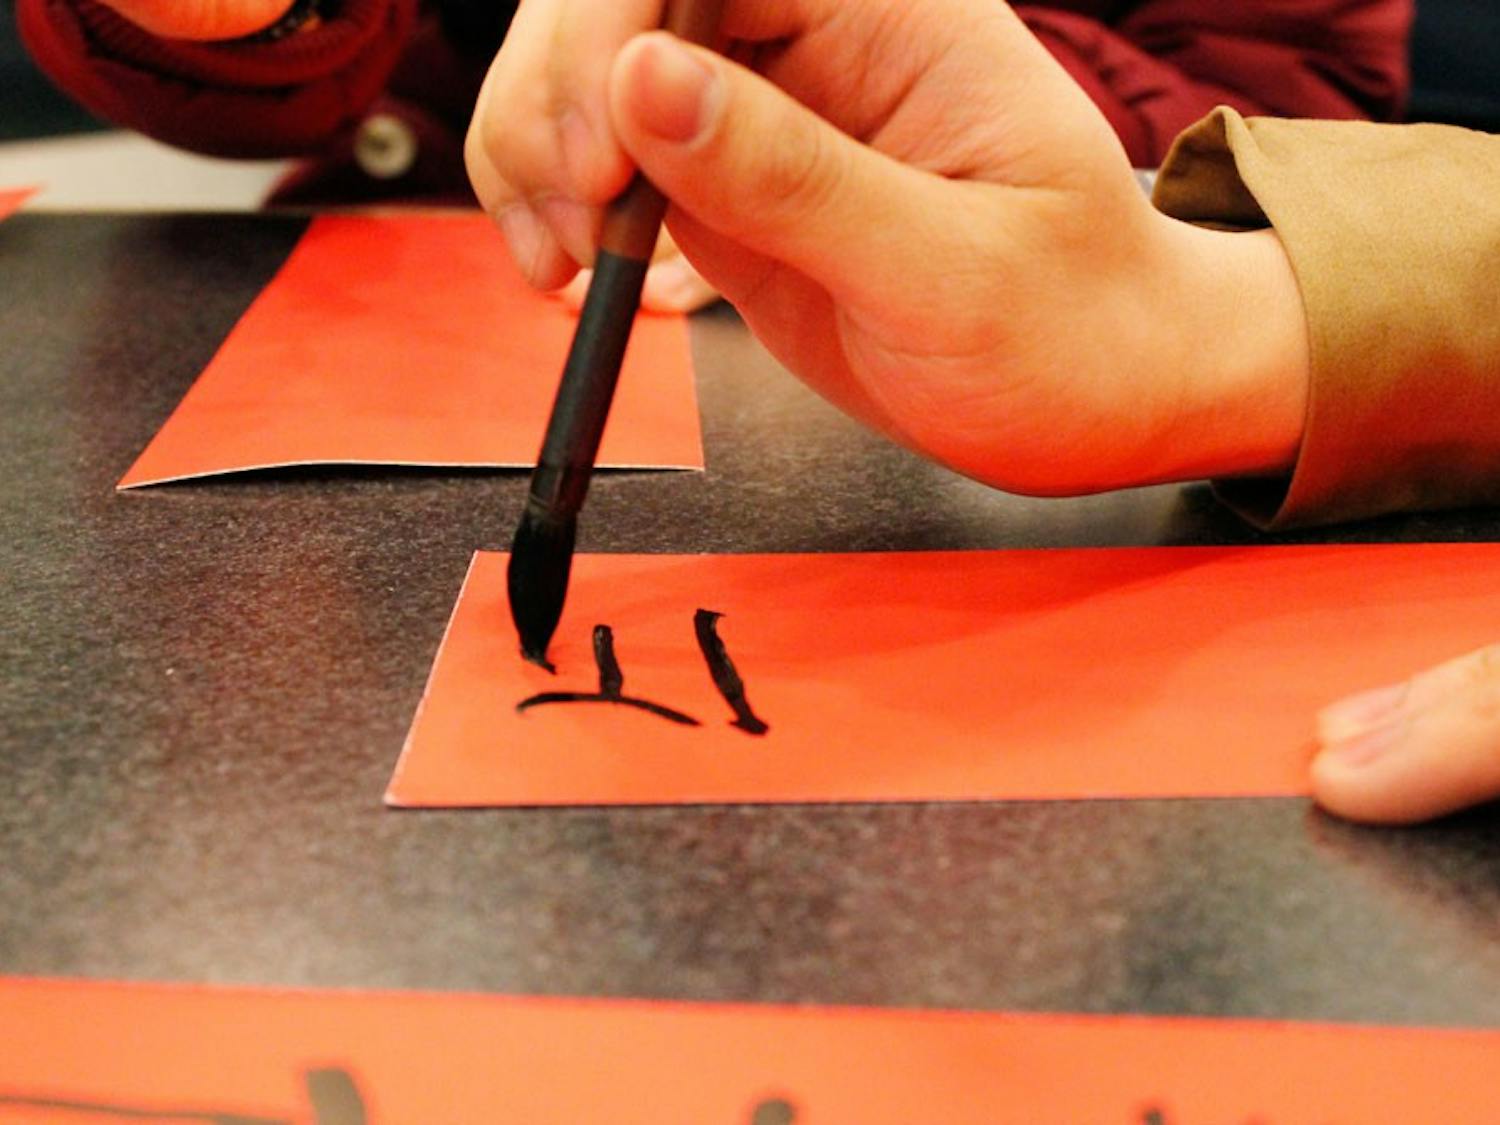 Ink brushes is a traditional Chinese stationary practice; it is used to write wishes in line poetry on red paper called "Chun Lian." 